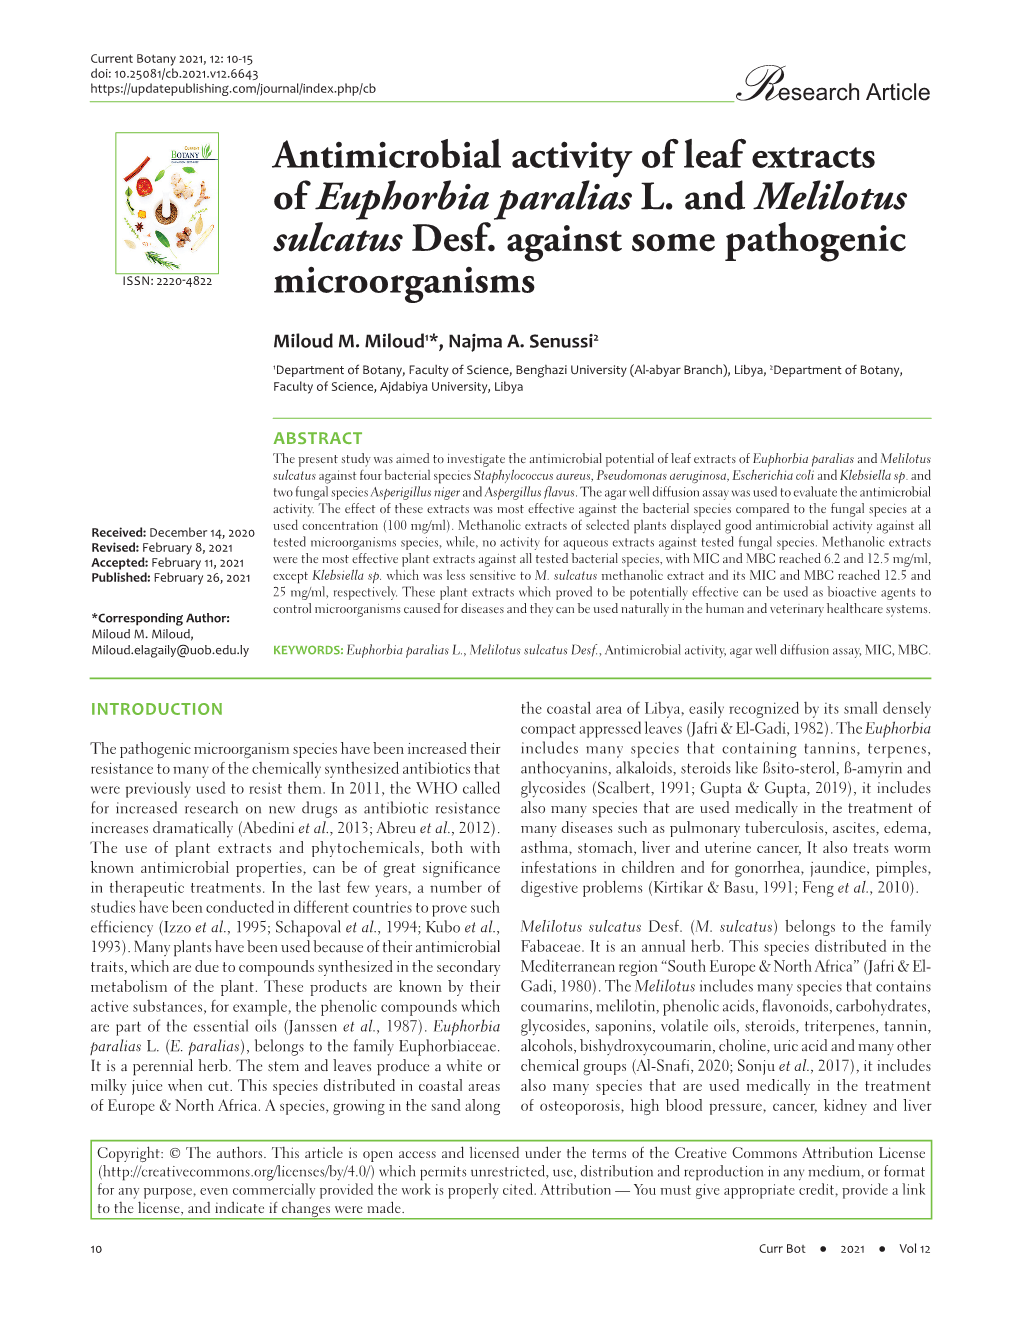 Antimicrobial Activity of Leaf Extracts of Euphorbia Paralias L. and Melilotus Sulcatus Desf